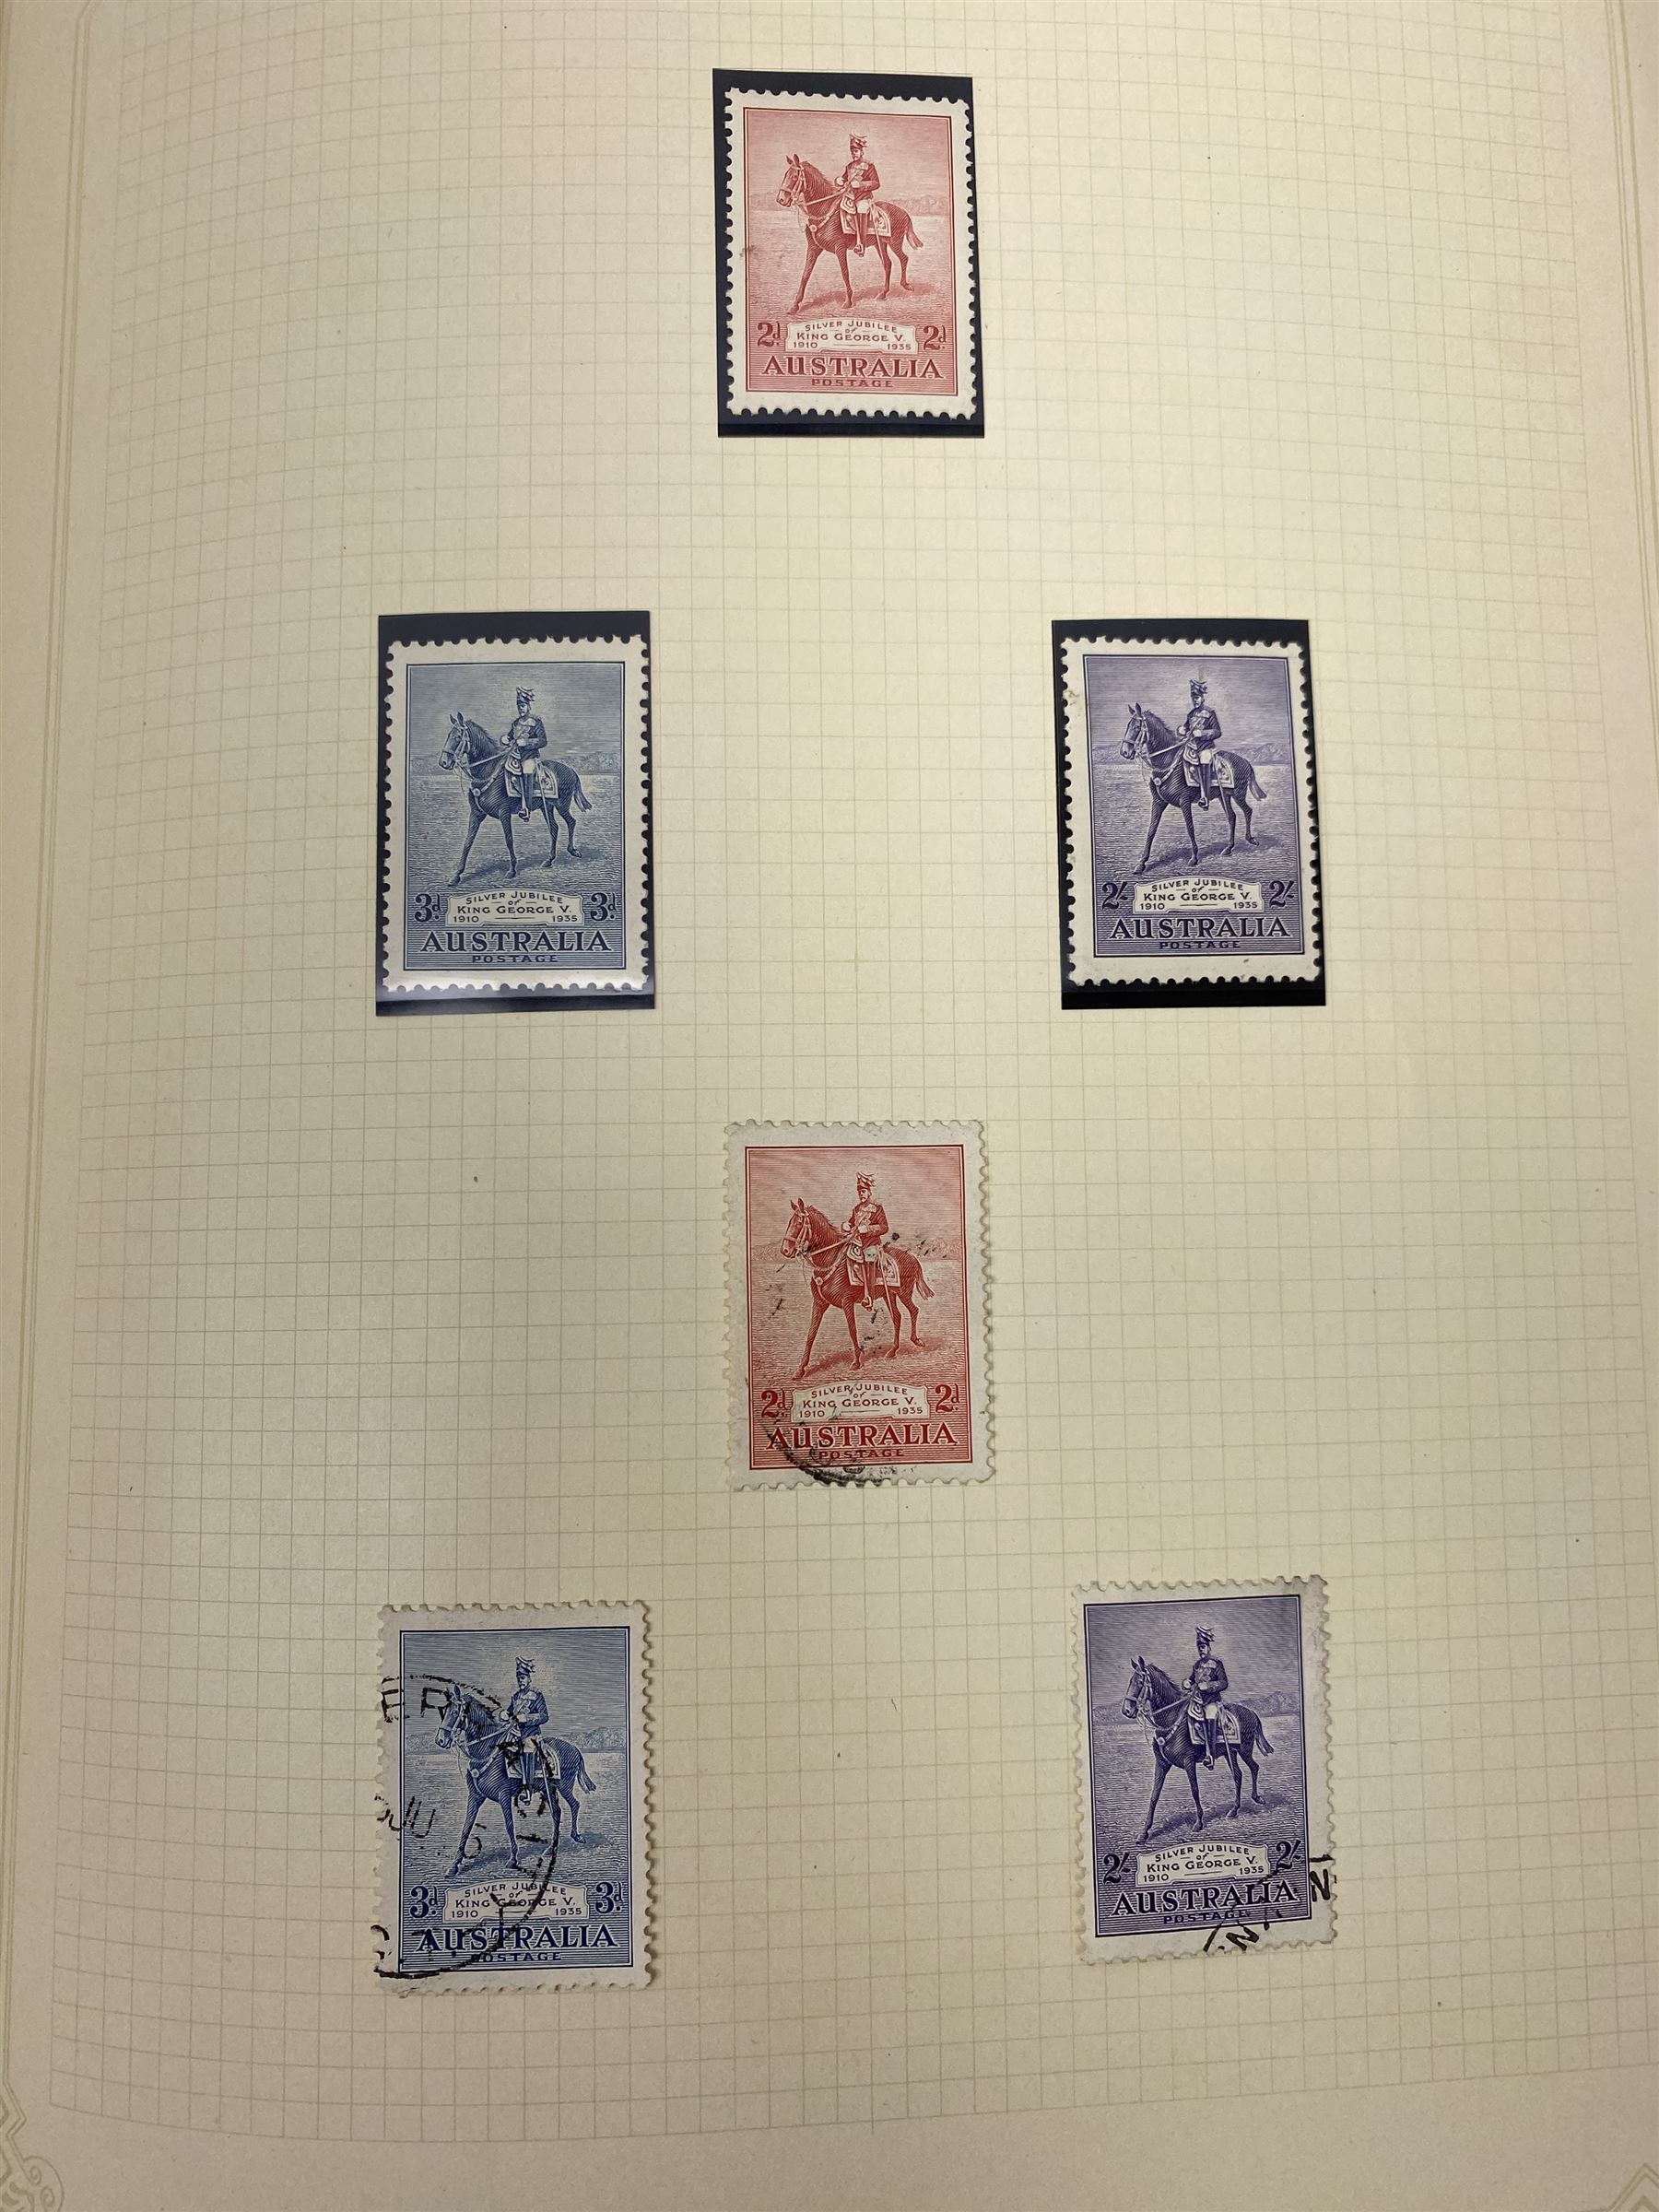 King George V 1935 Silver Jubilee stamps - Image 6 of 17